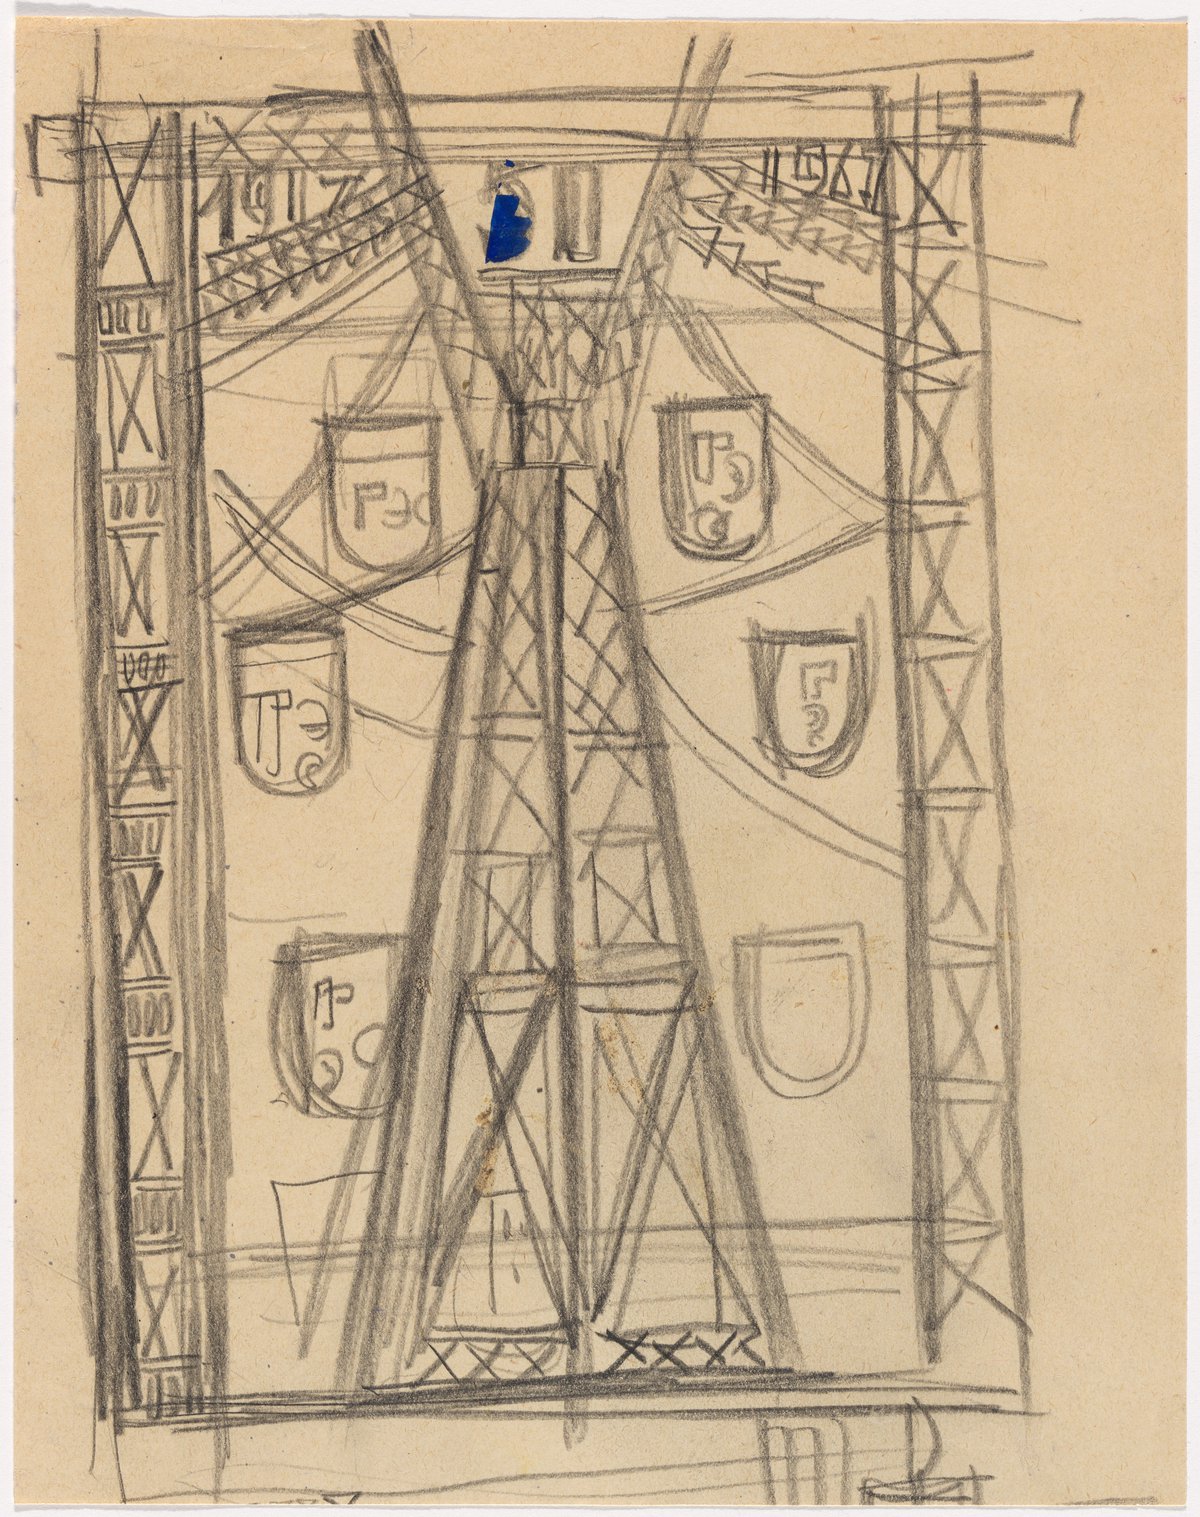 Anna AndreevaStudy for Decorative Textile for the Club of Energetics, c. 1967Pencil and tempera on paperapprox. 30 x 20 cmCourtesy the Museum of Modern Art, New YorkDigital Image © 2022 The Museum of Modern Art, New York